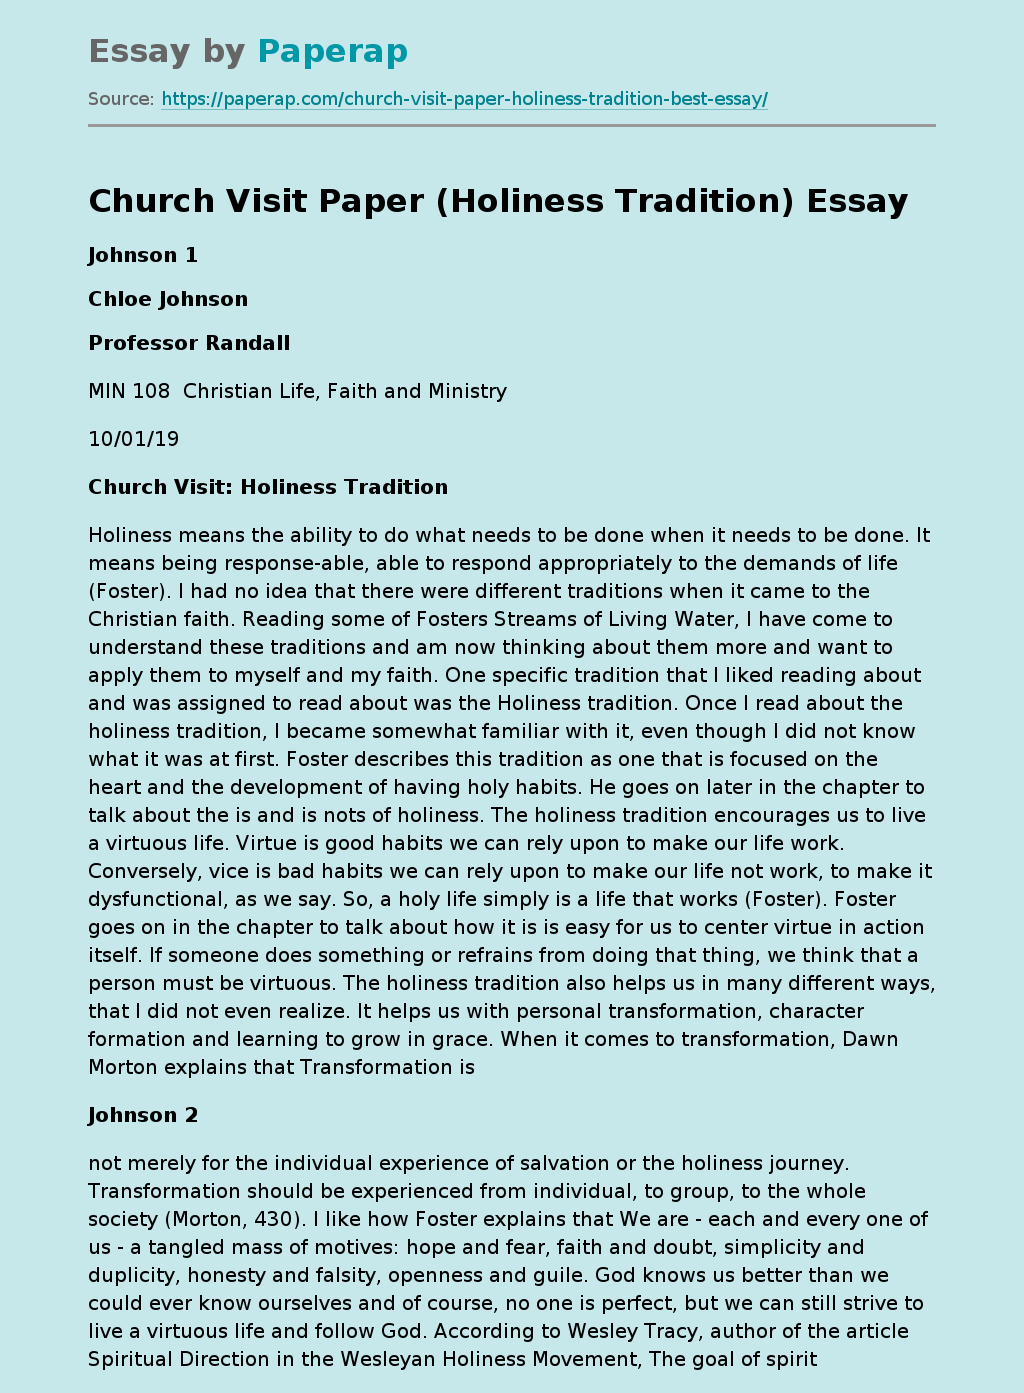 Church Visit Paper (Holiness Tradition)